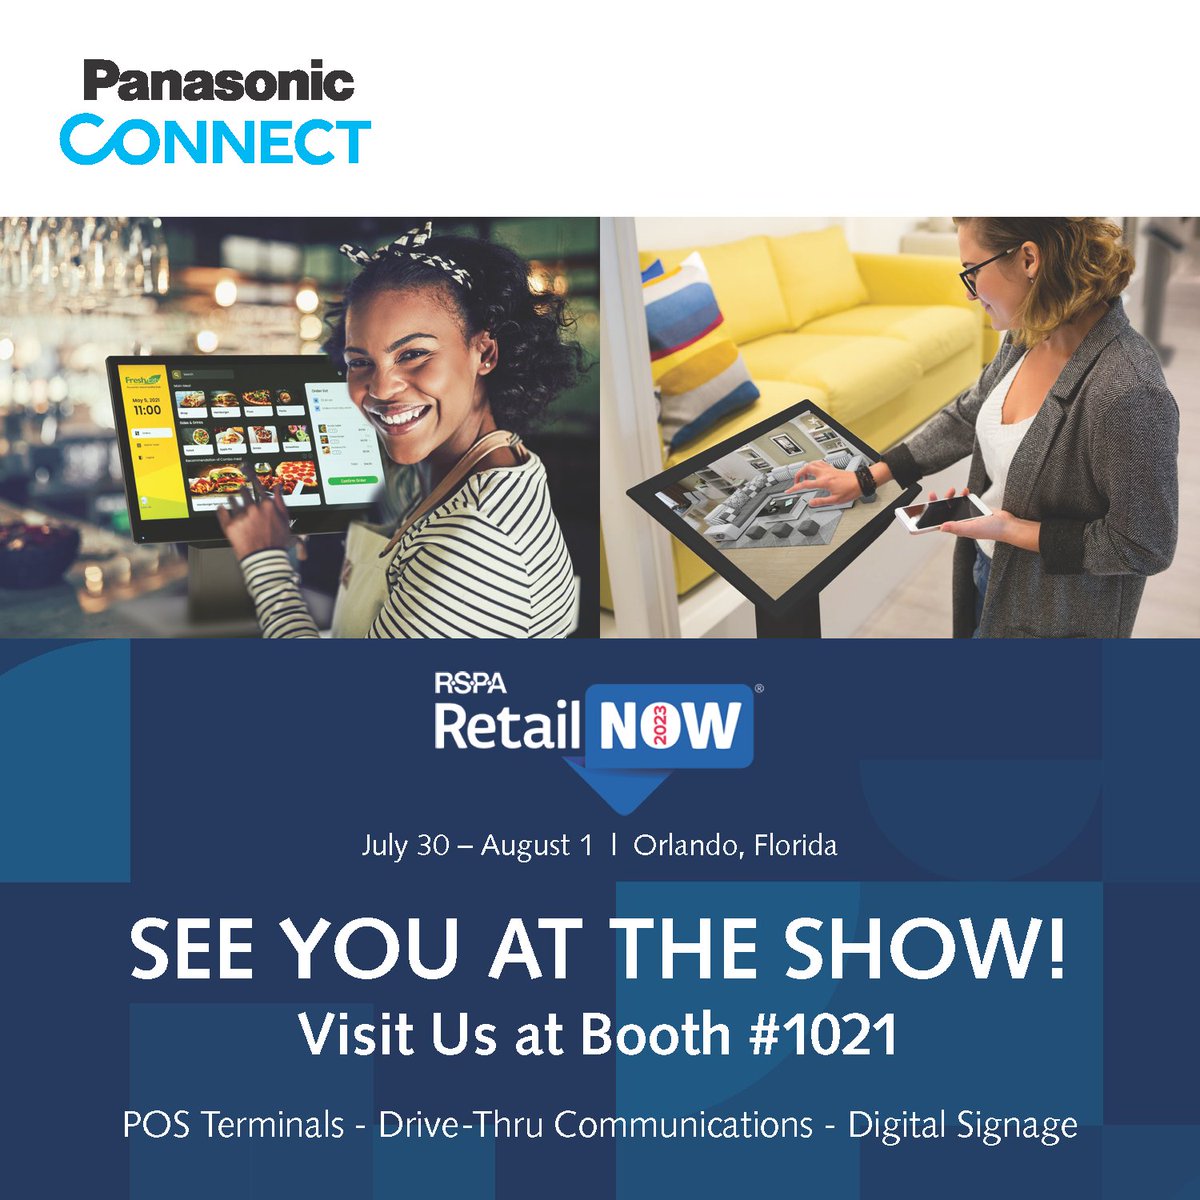 Looking for a #POS terminal suited for various industries? 
Visit Panasonic Connect at #RetailNOW at Booth 1021 to see our wide variety of configurations!

#RSPA #PanasonicConnect #restaurant #retail #store #technology